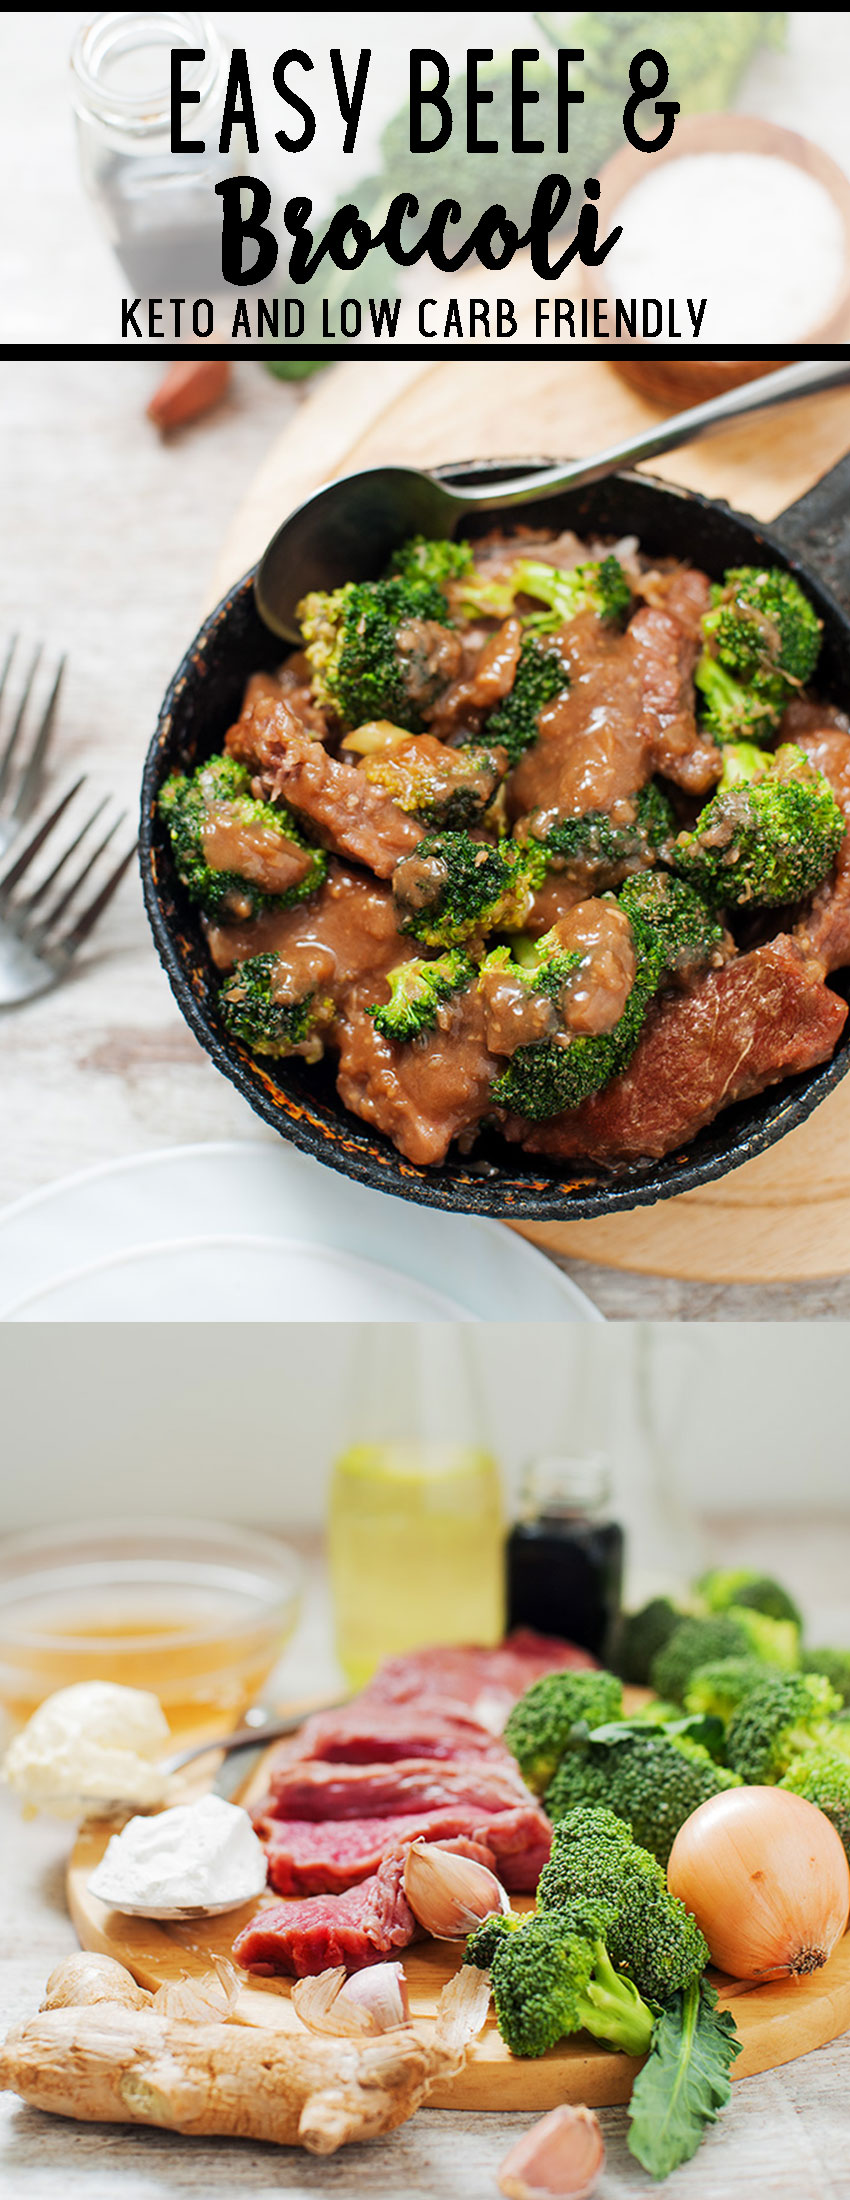 Keto beef and broccoli- a low carb solution for our favorite take out